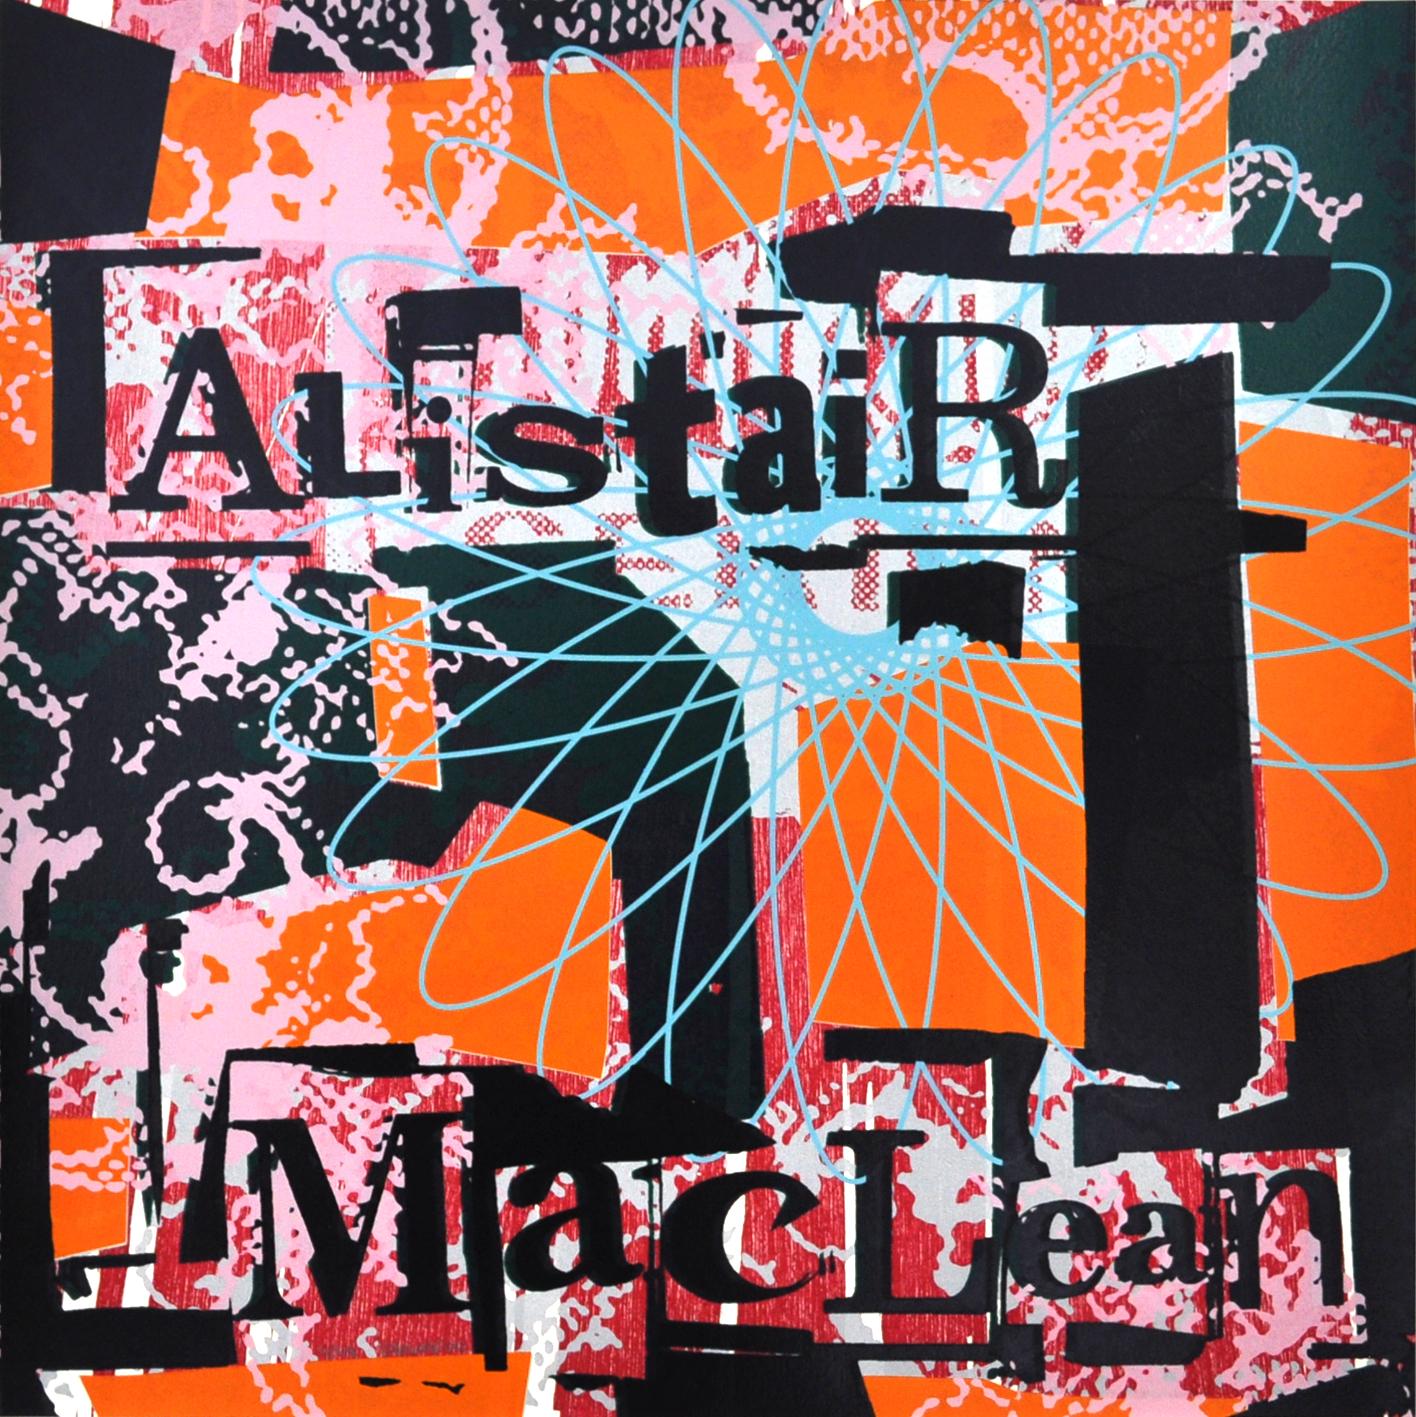 Scandinavian Screen Print and Woodcut “Alistair MacLean” , numbered and signed - Mixed Media Art by Lars Grenaae